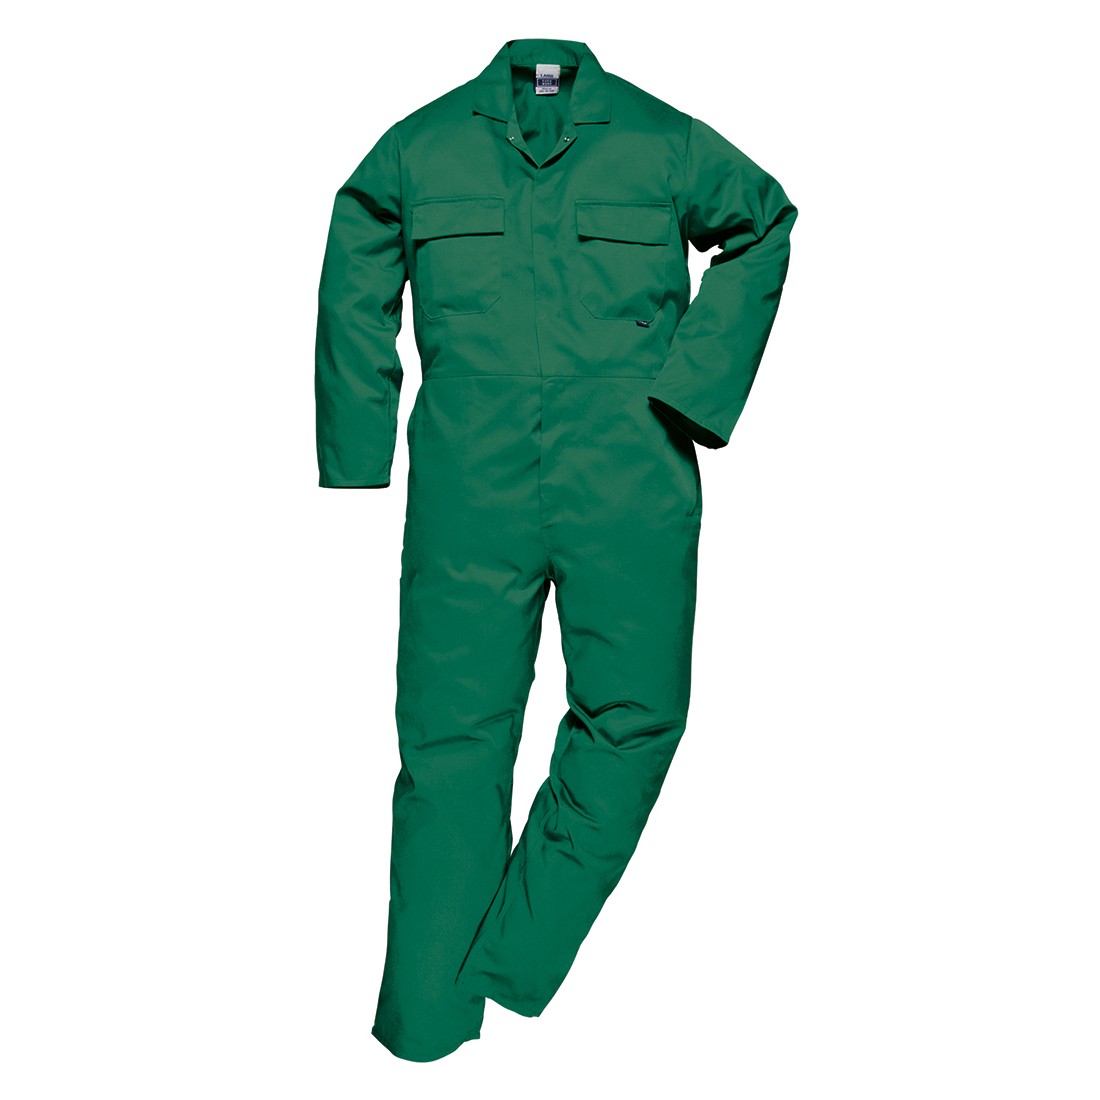 S999 Coverall Jumpsuit (Green) - Multi-pocket work coverall - Portwest  S999BGR